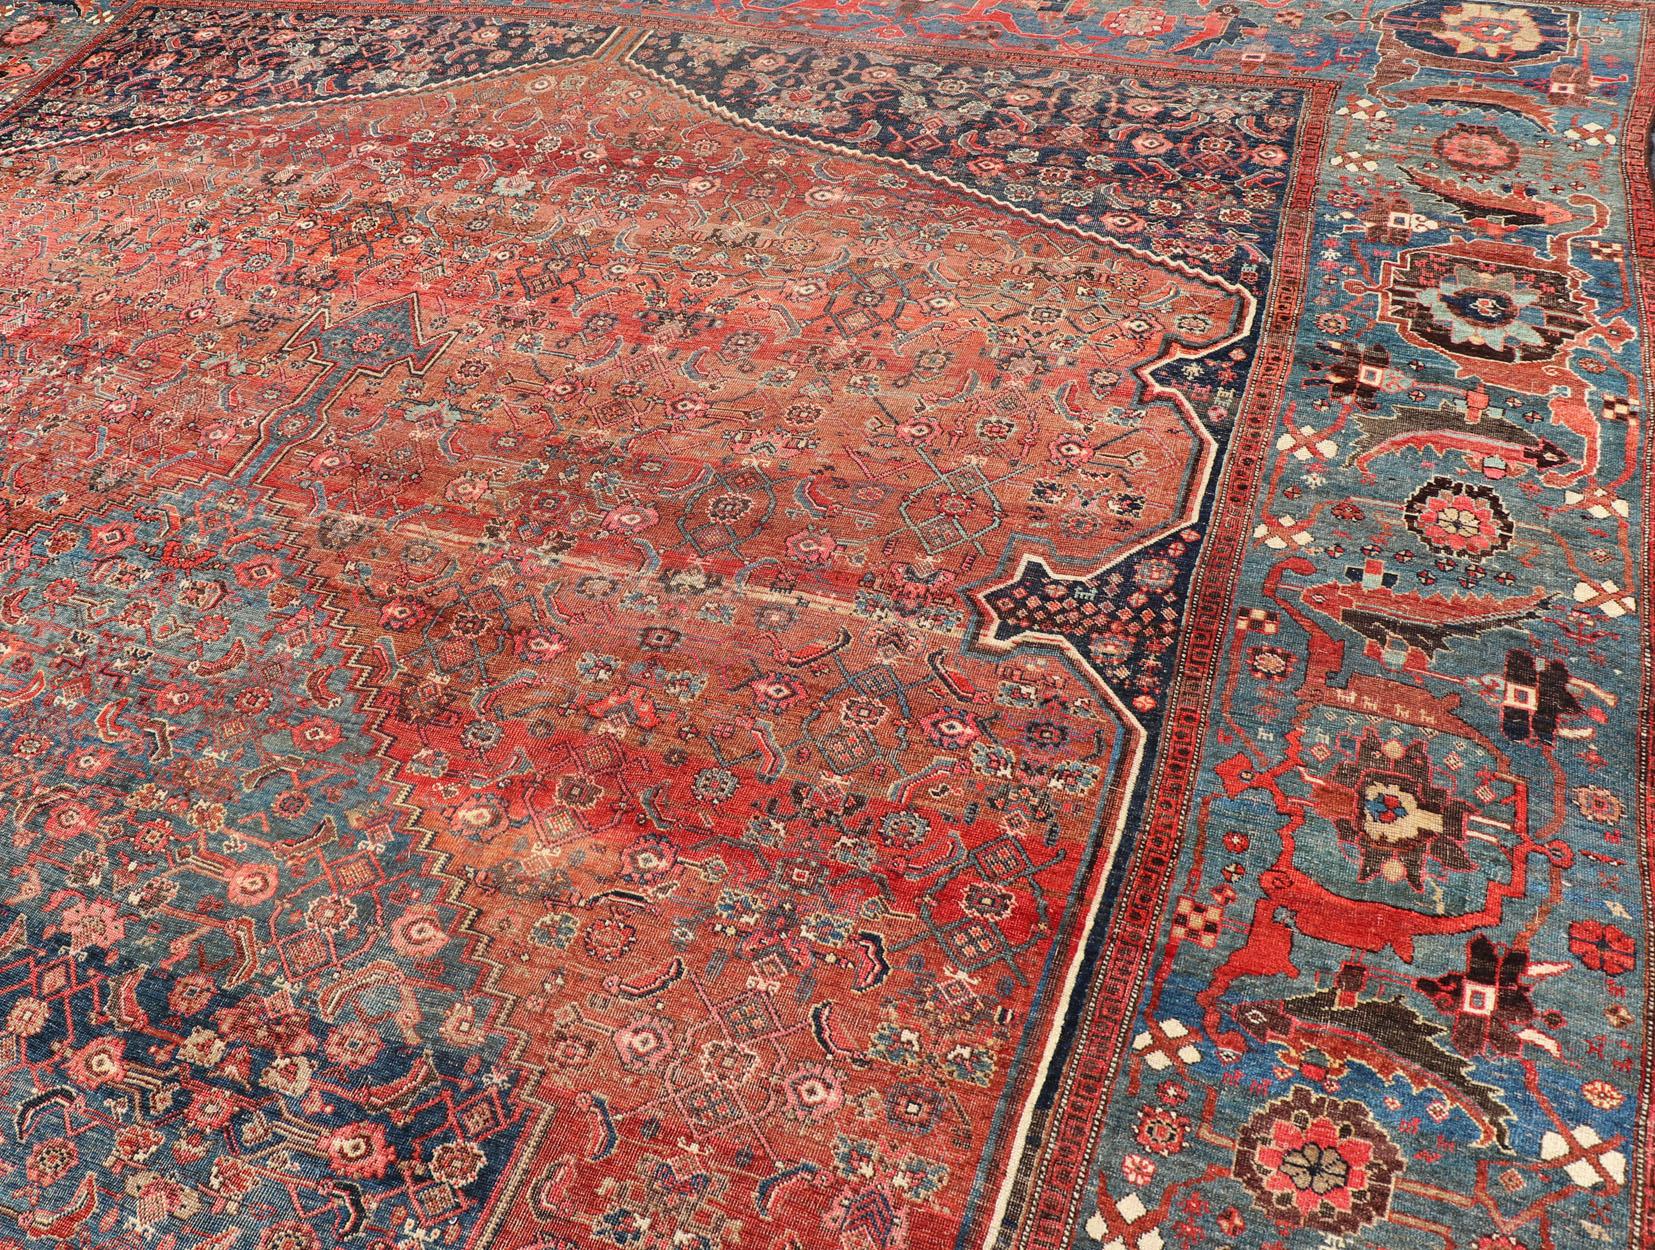 Very Large Antique Persian Bidjar Rug in Multi Shades of Blue, Tera-Cotta & Red For Sale 6